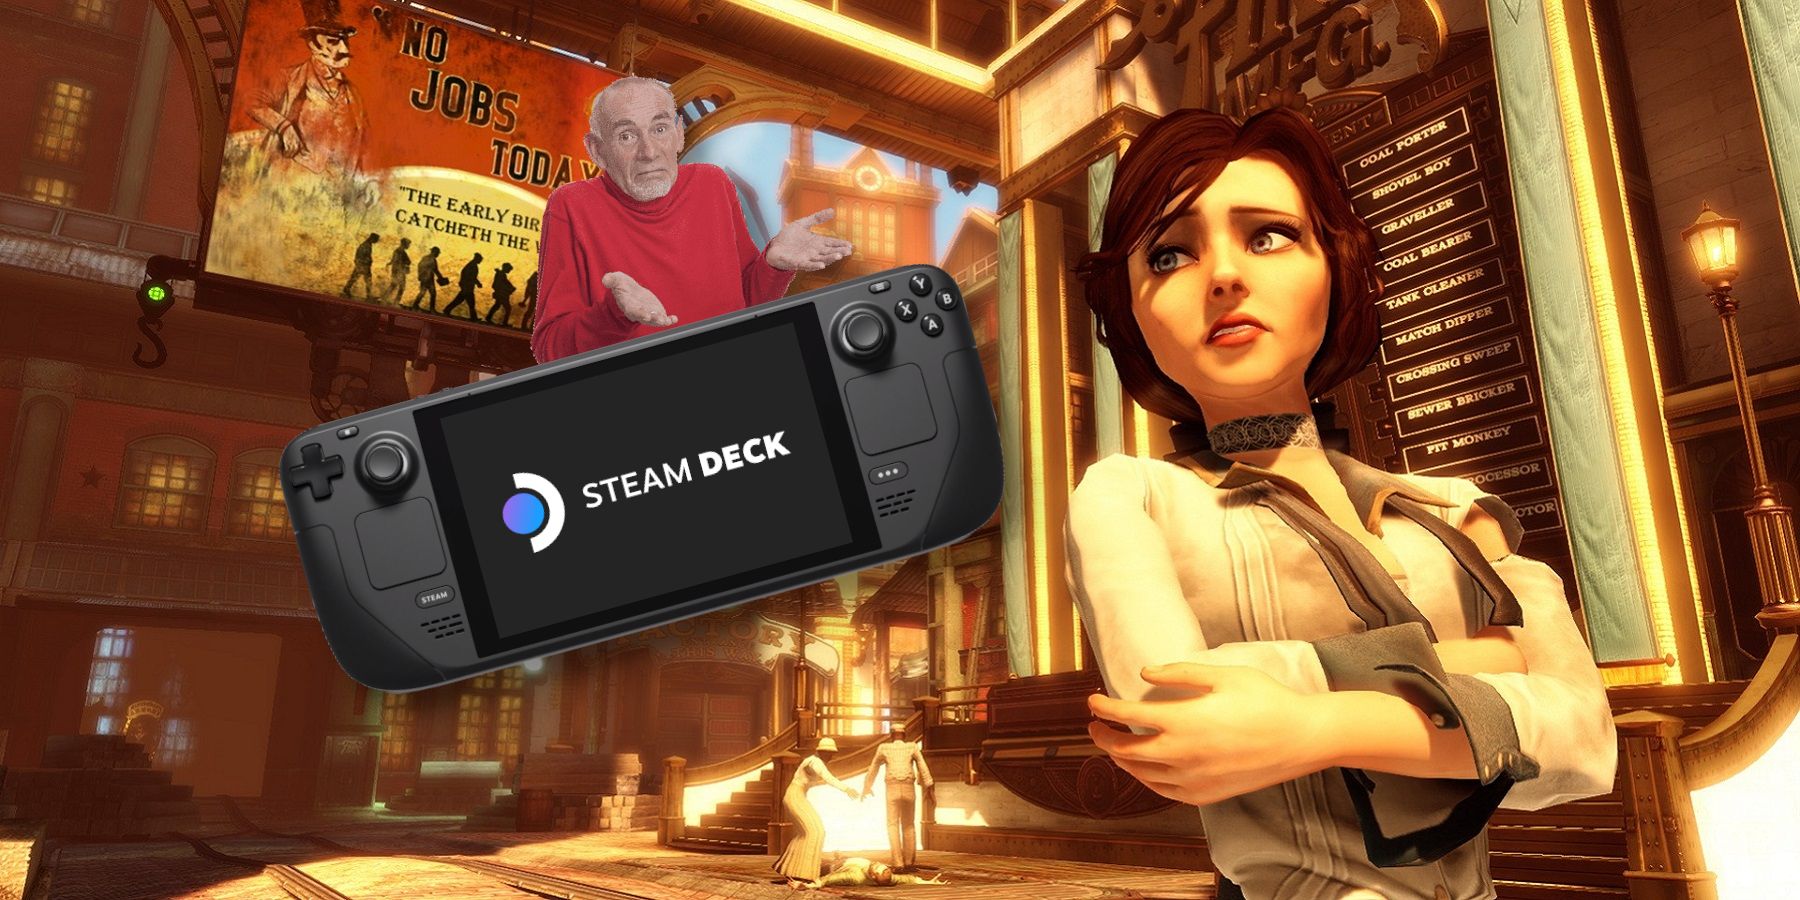 Image showing Elizabeth from Bioshock Infinite looking at a floating Steam Deck as a tiny man shrugs behind it.